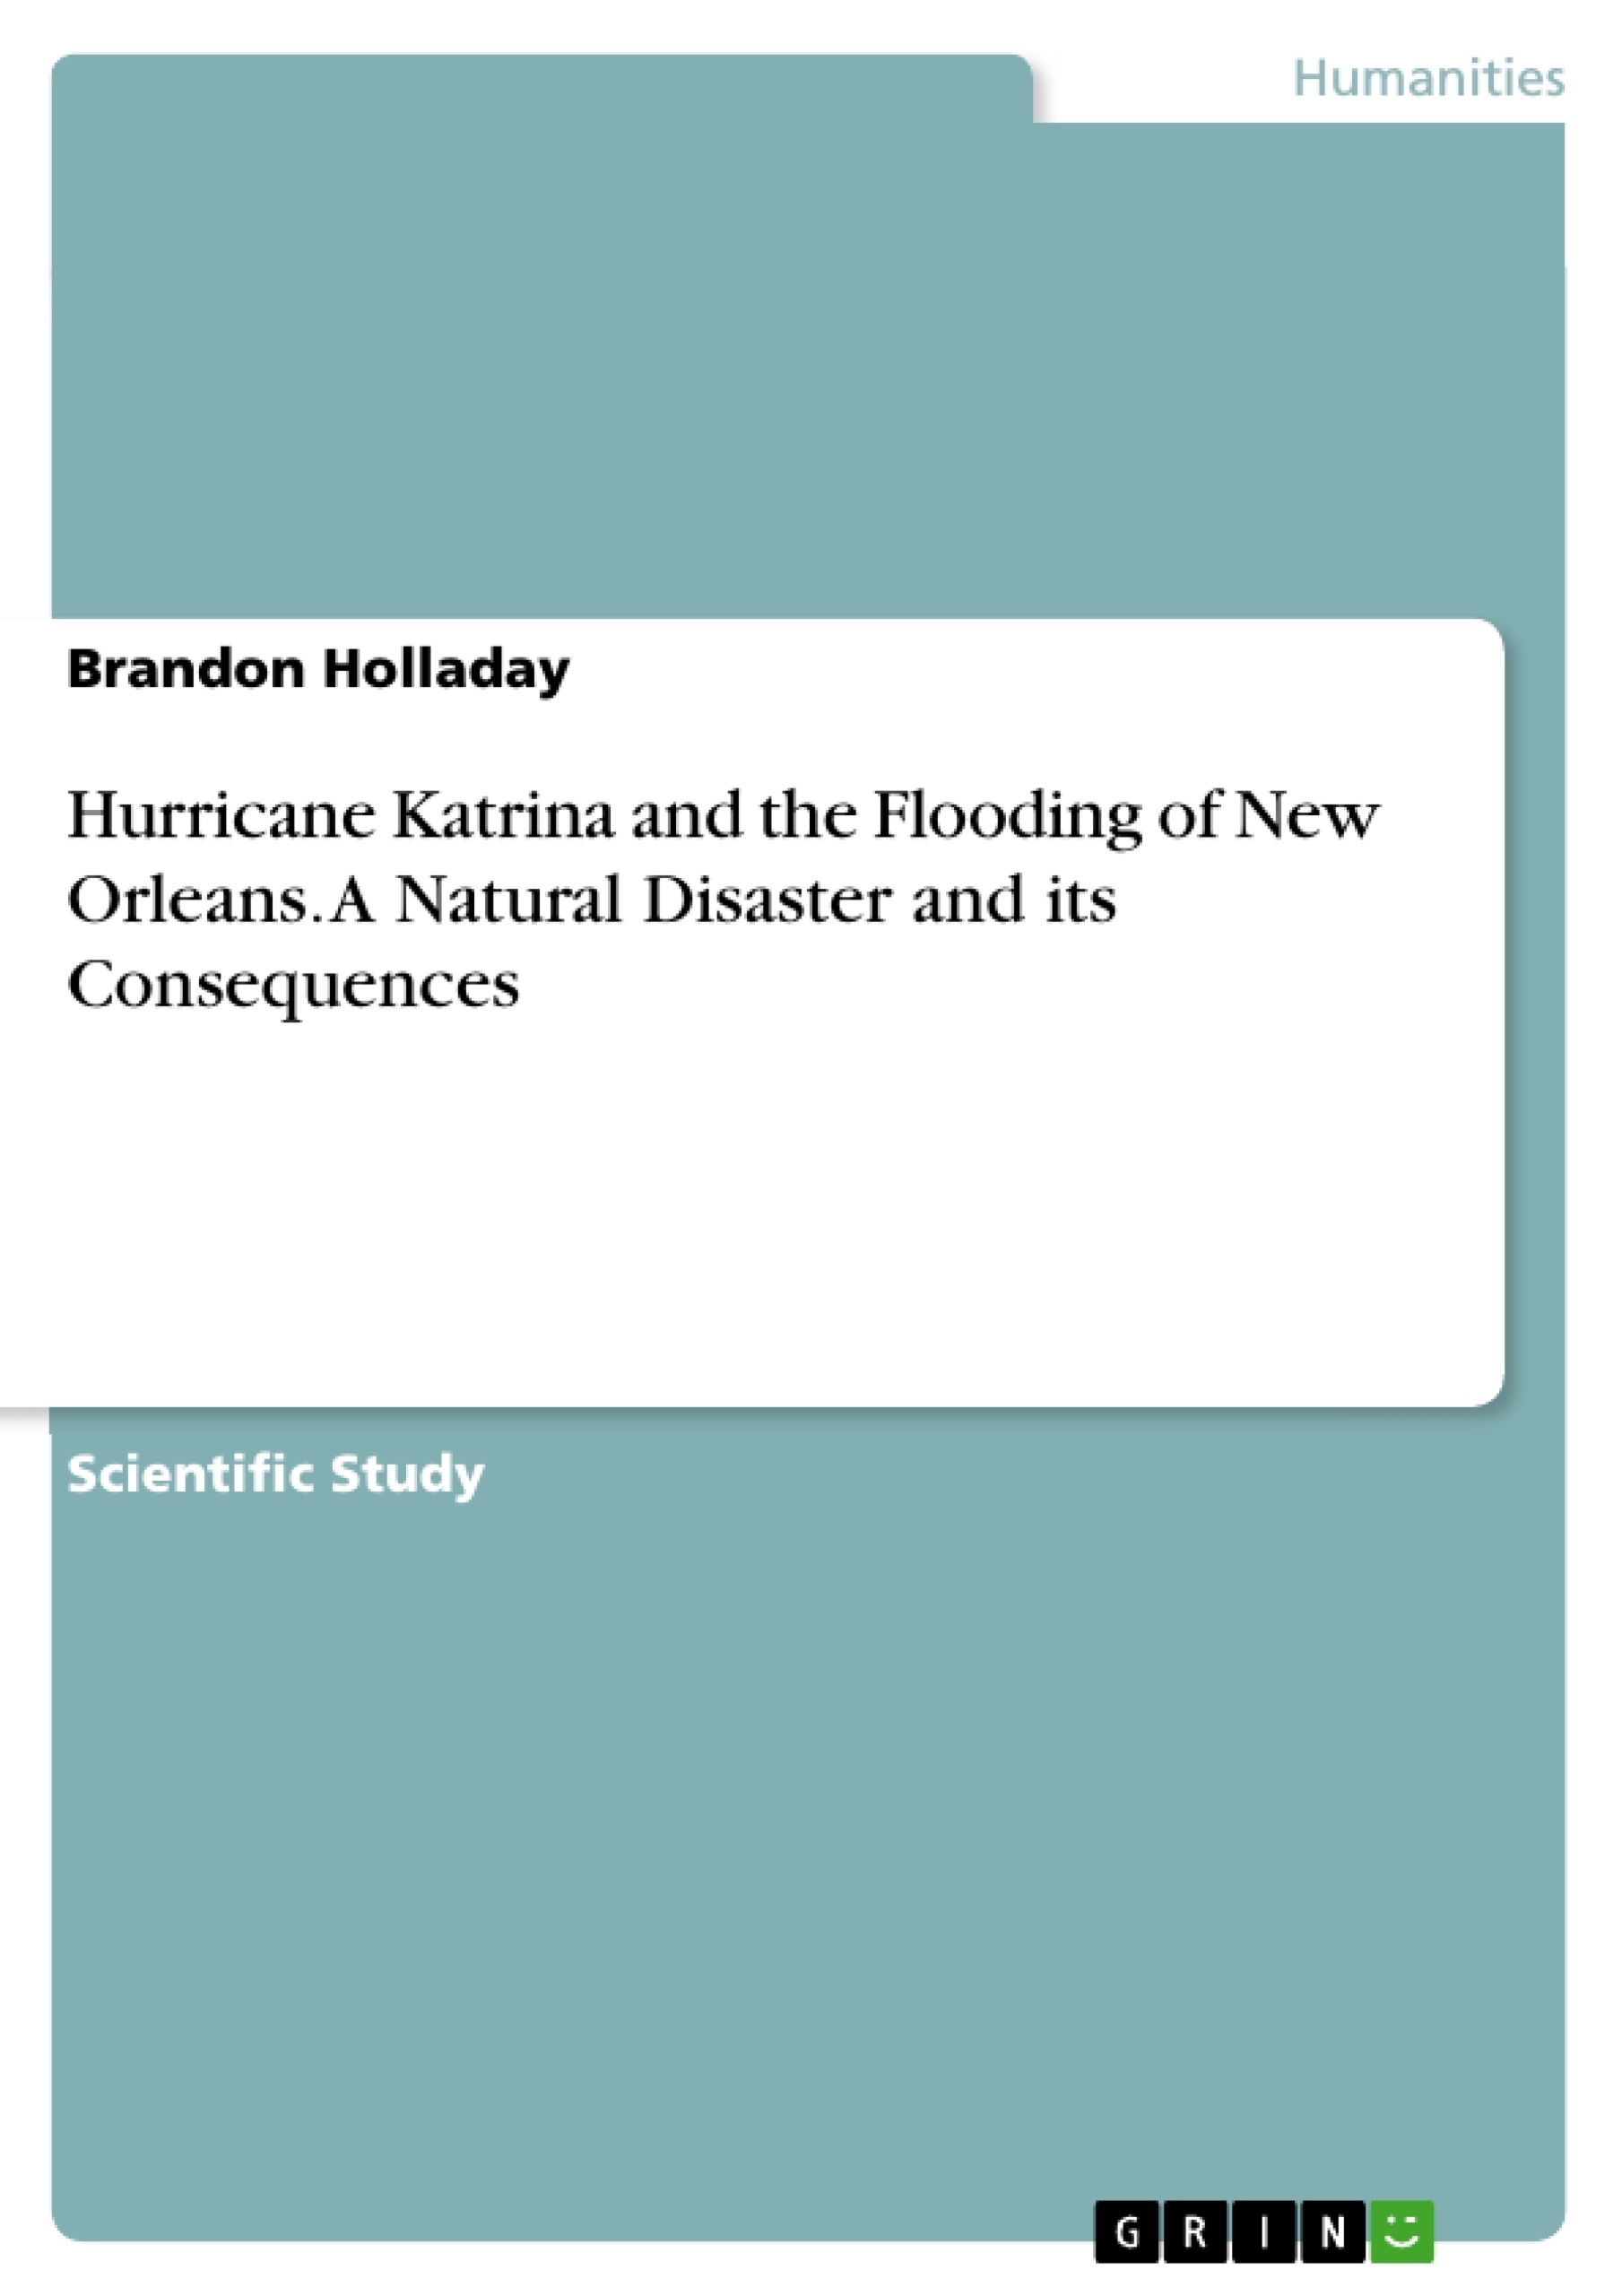 Titel: Hurricane Katrina and the Flooding of New Orleans. A Natural Disaster and its Consequences